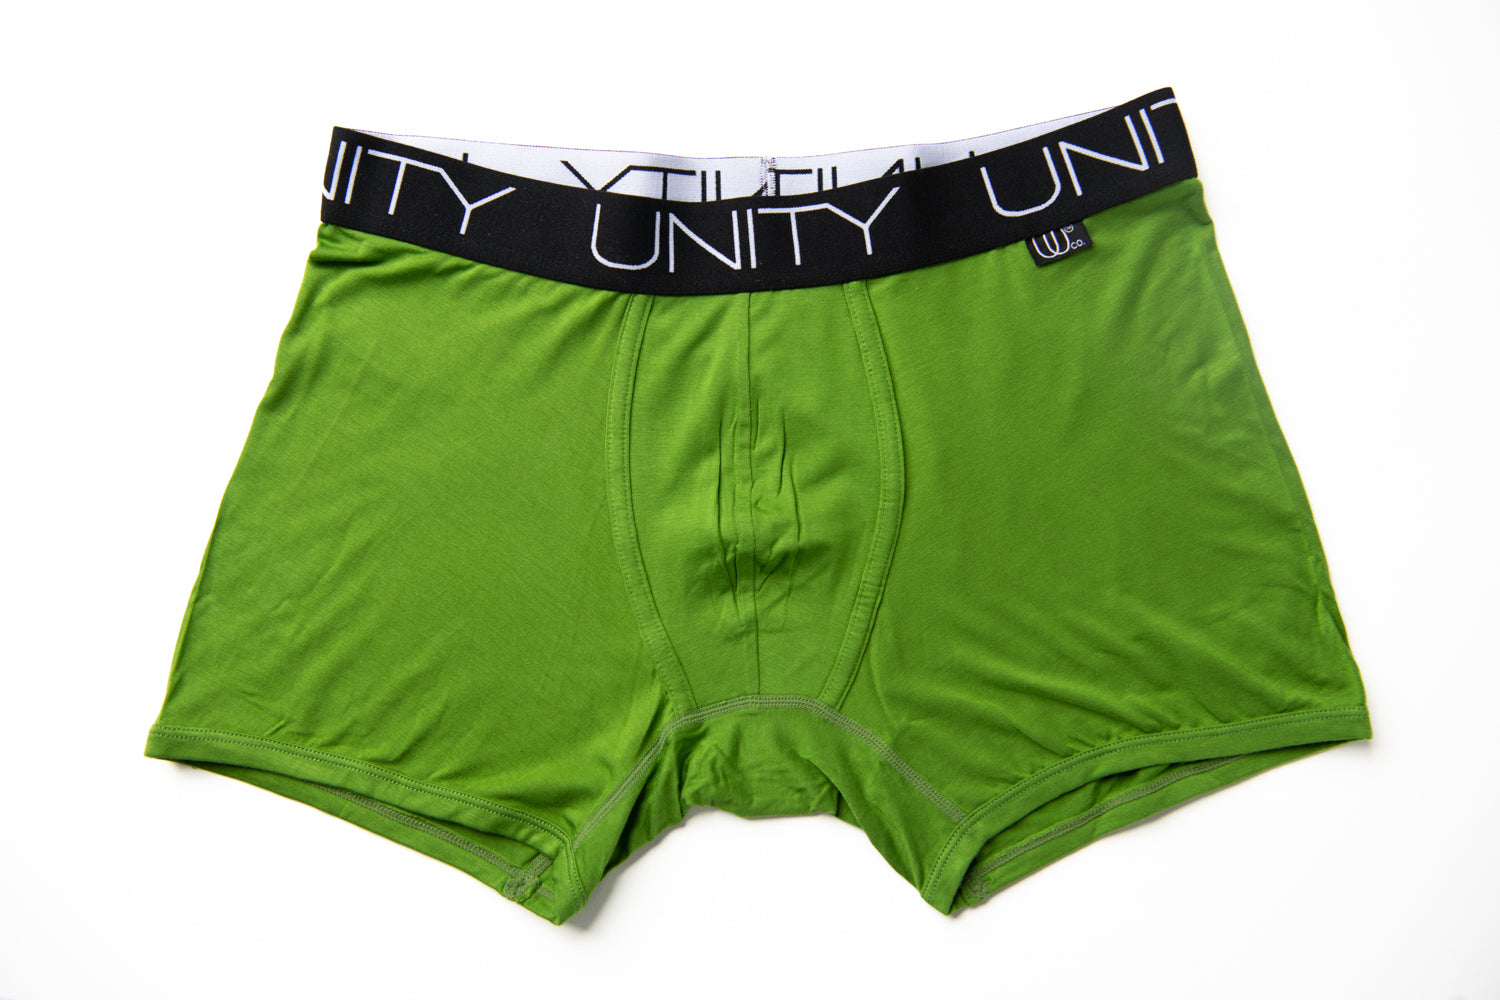 Pear Green Unity Underwear - The Most Comfortable Underwear For